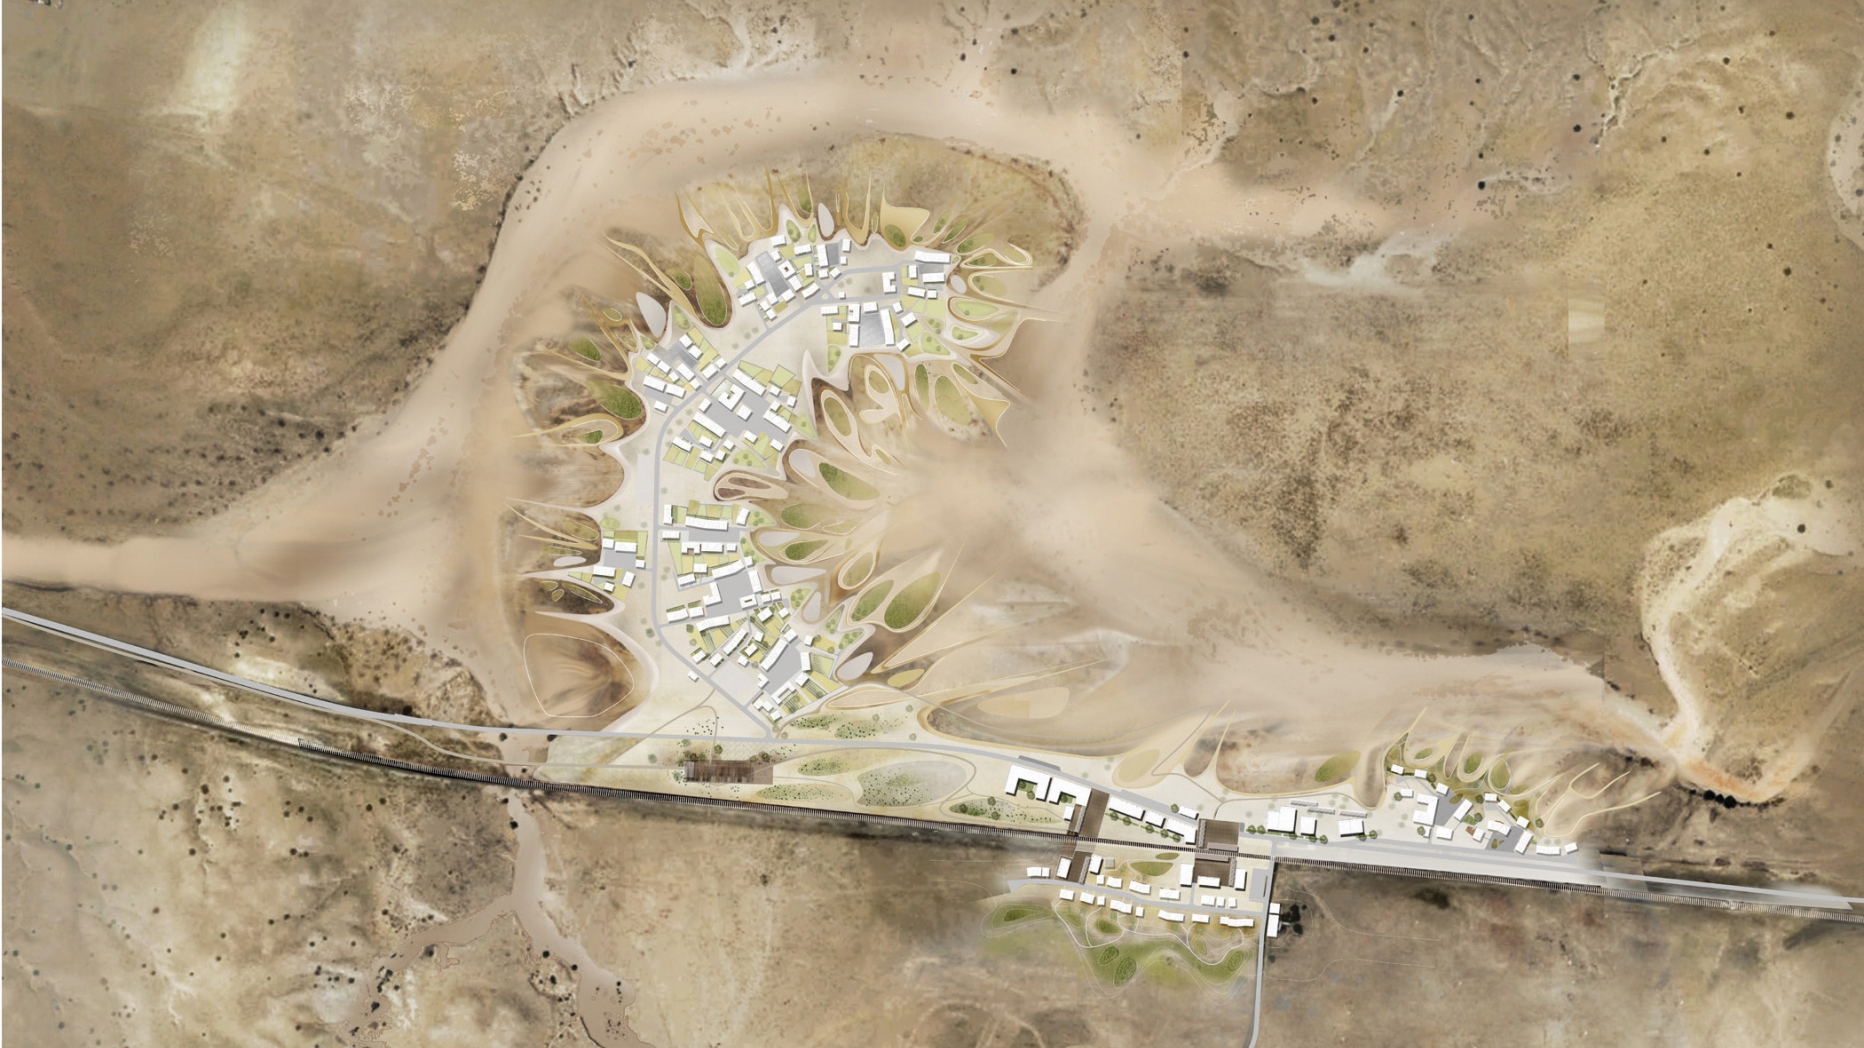 Overhead view image of potential large scale multi building architectural project in desert.